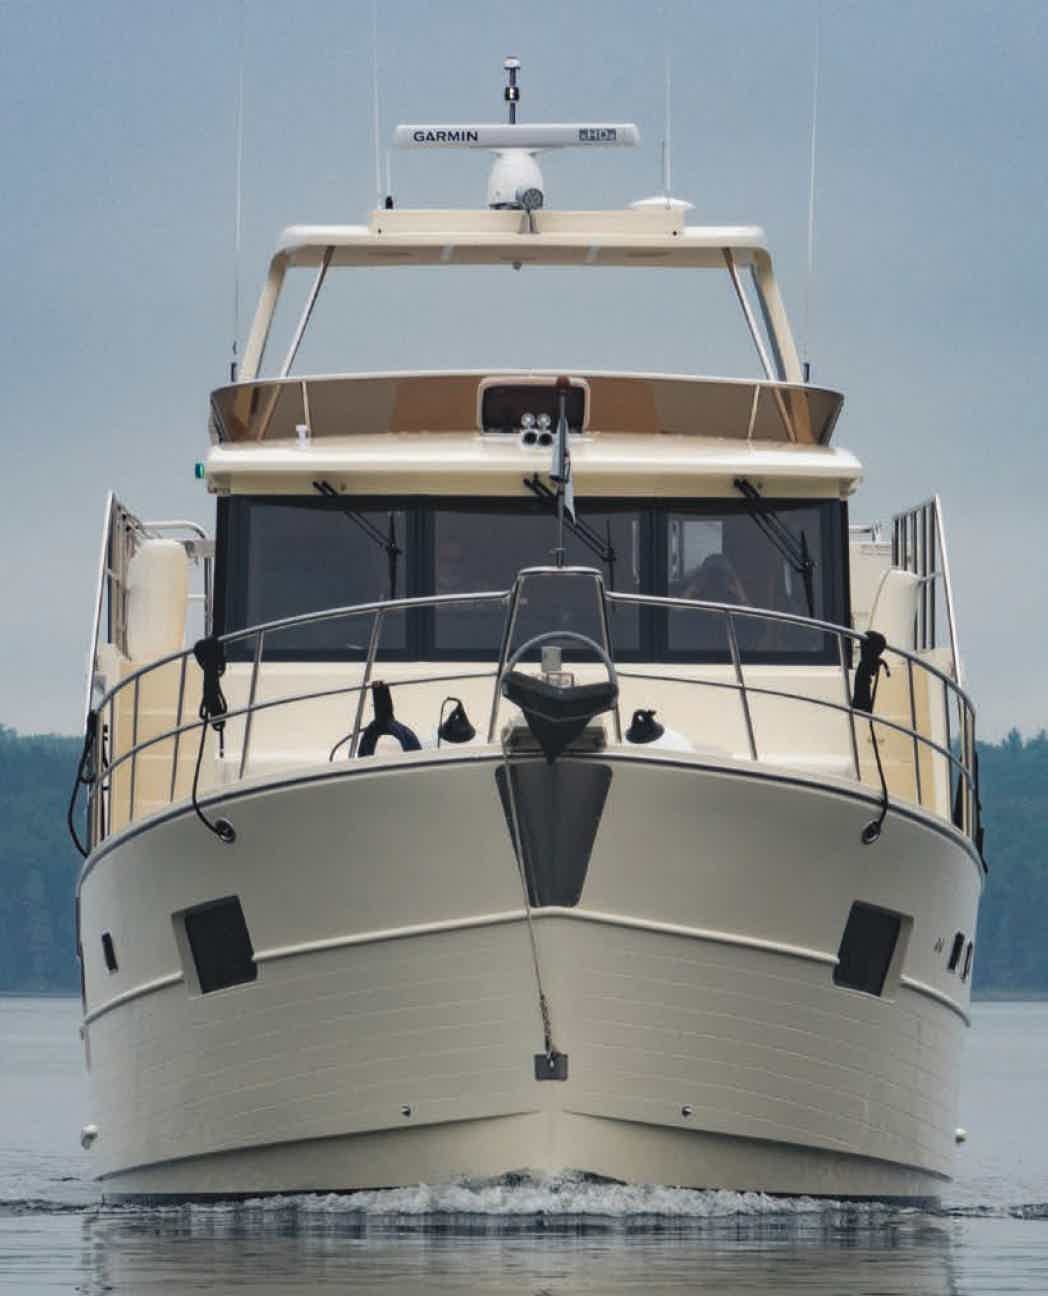 Going Modern: North Pacific Yachts creates a more contemporary version of its 49-foot trawler